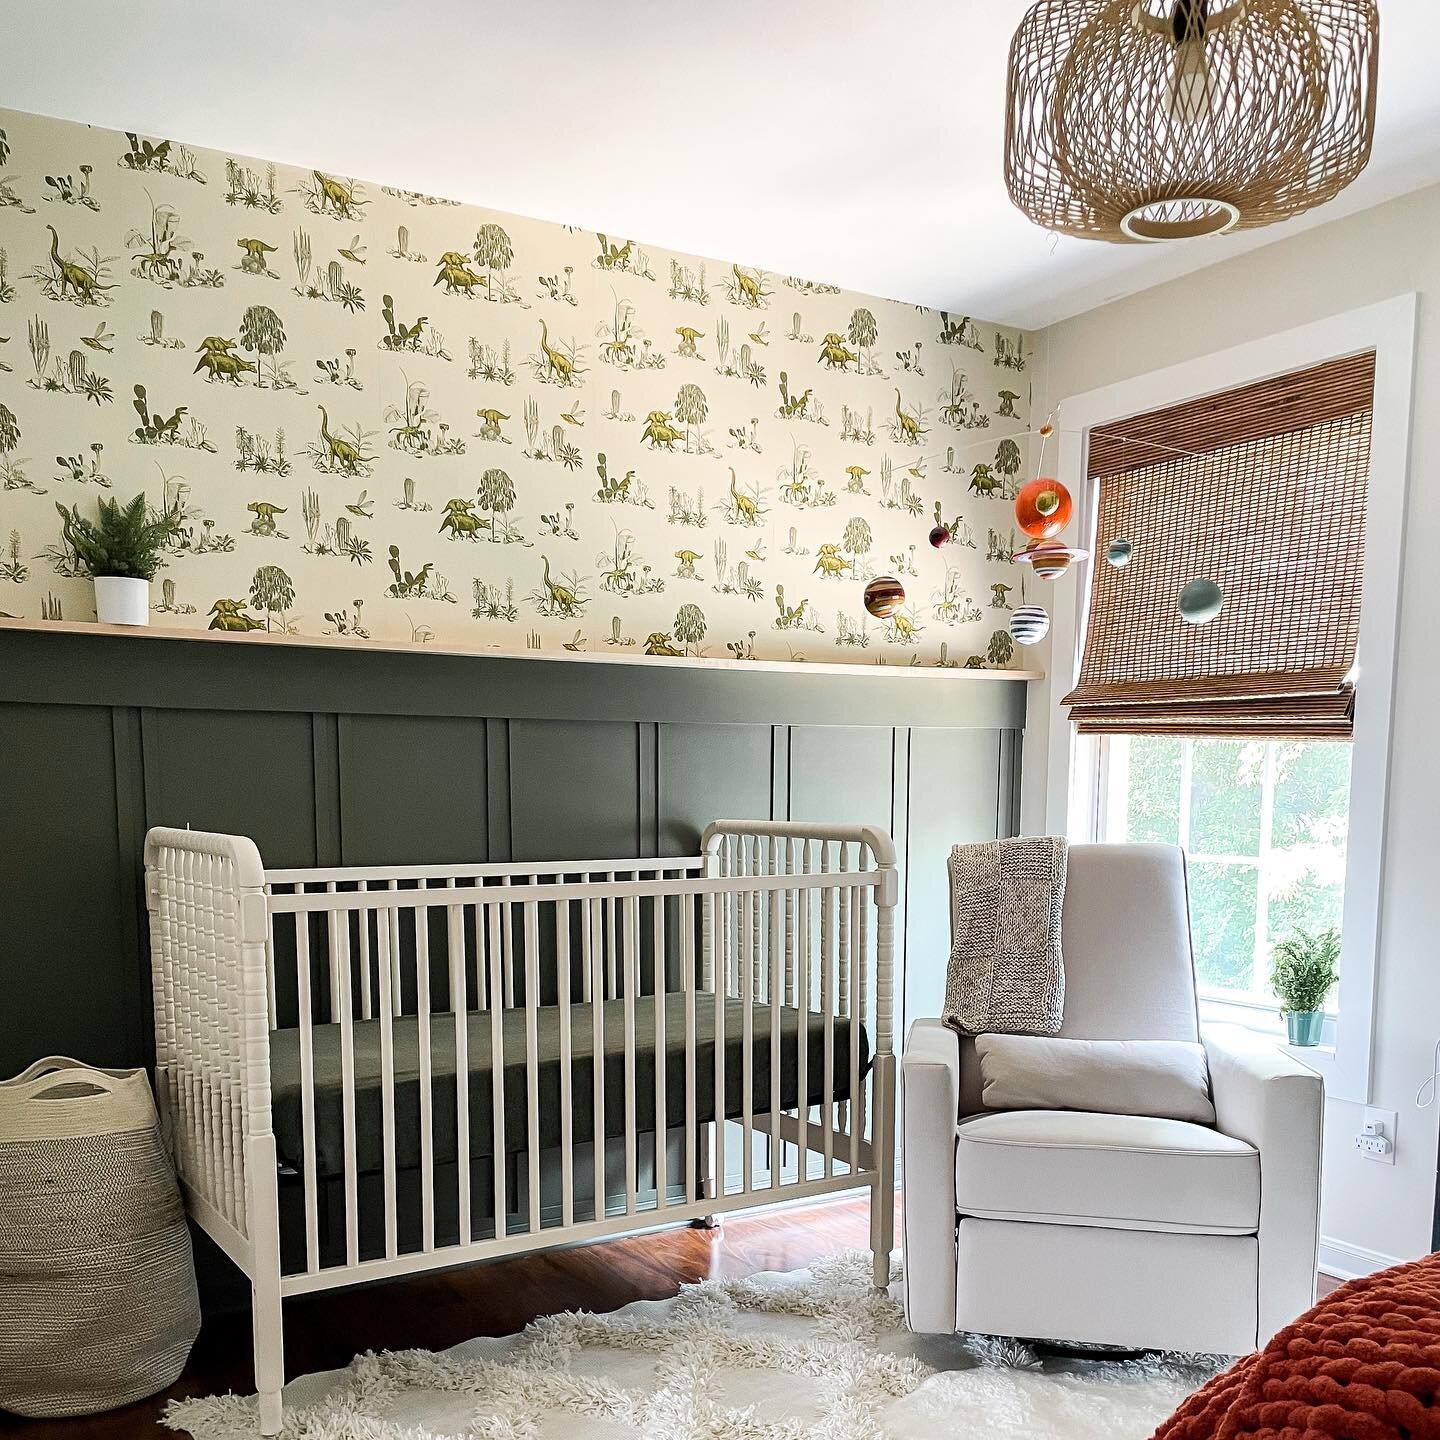 Every time I finish a nursery, it&rsquo;s my favorite room in the house. I like to keep them clutter-free and simple. I like something they can grow into but still is fun and a little whimsical. I knew I had to use this wallpaper the minute I saw it.